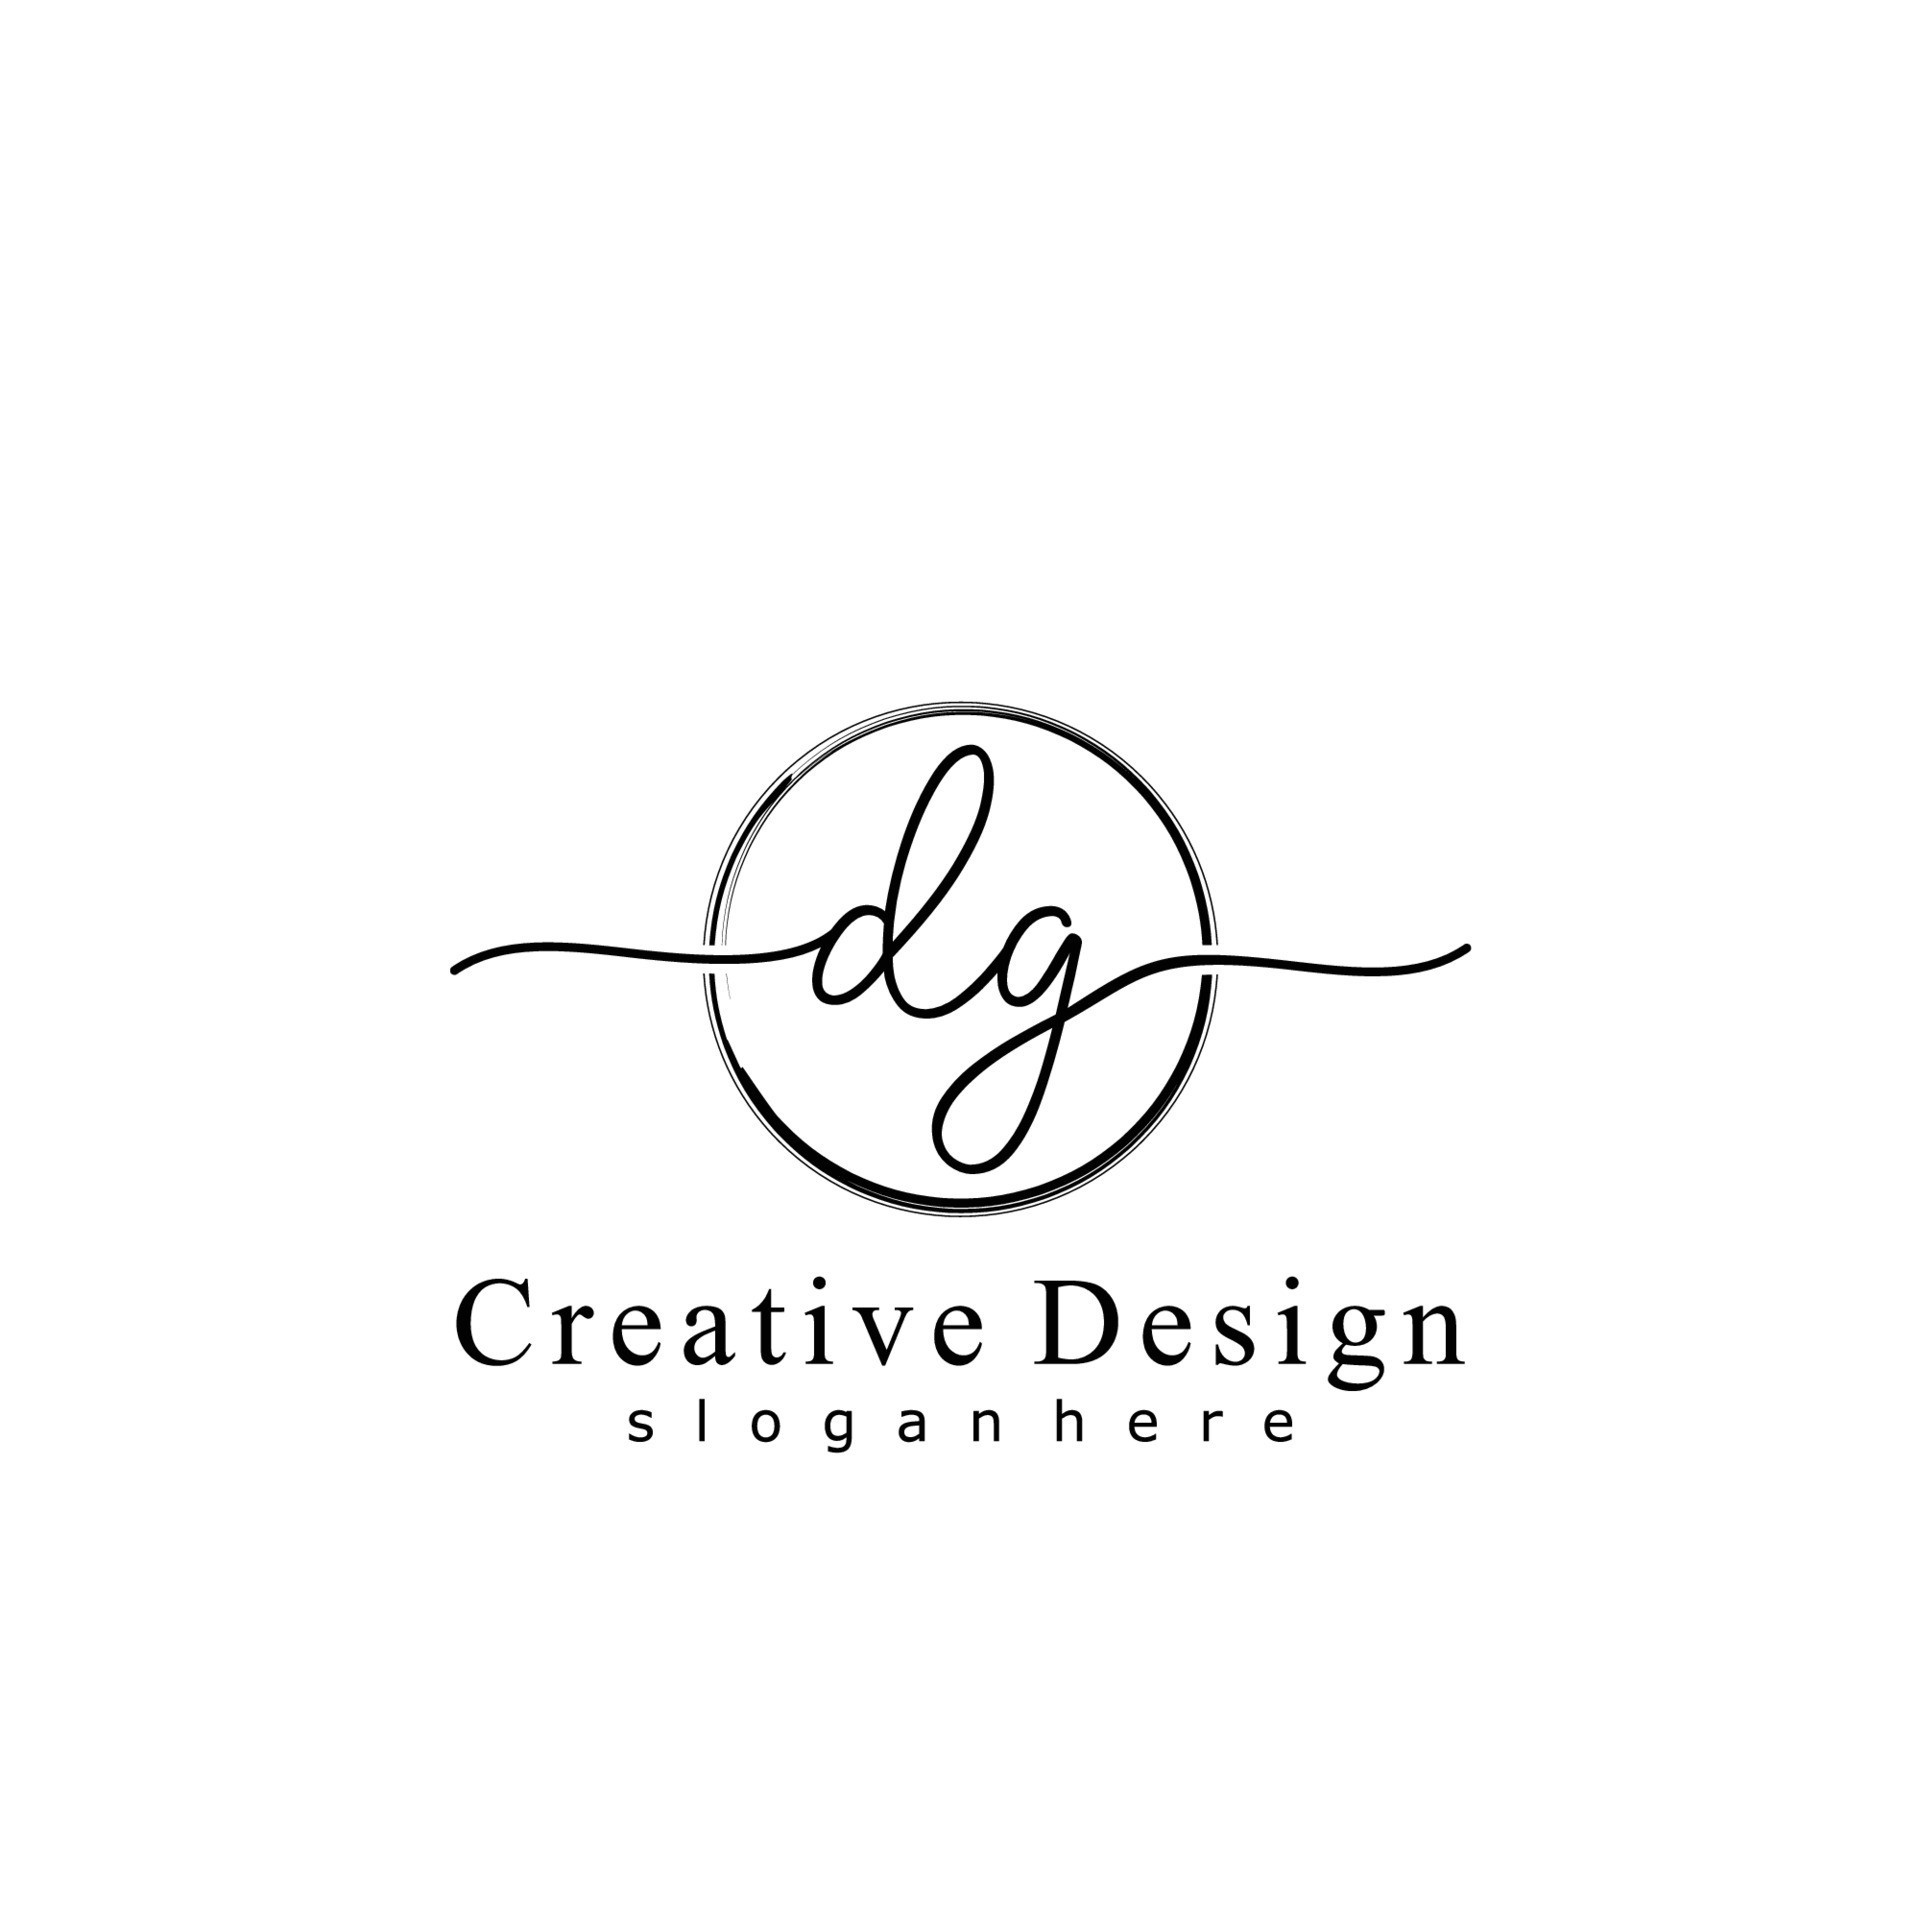 Initial DG handwriting logo with circle hand drawn template vector ...